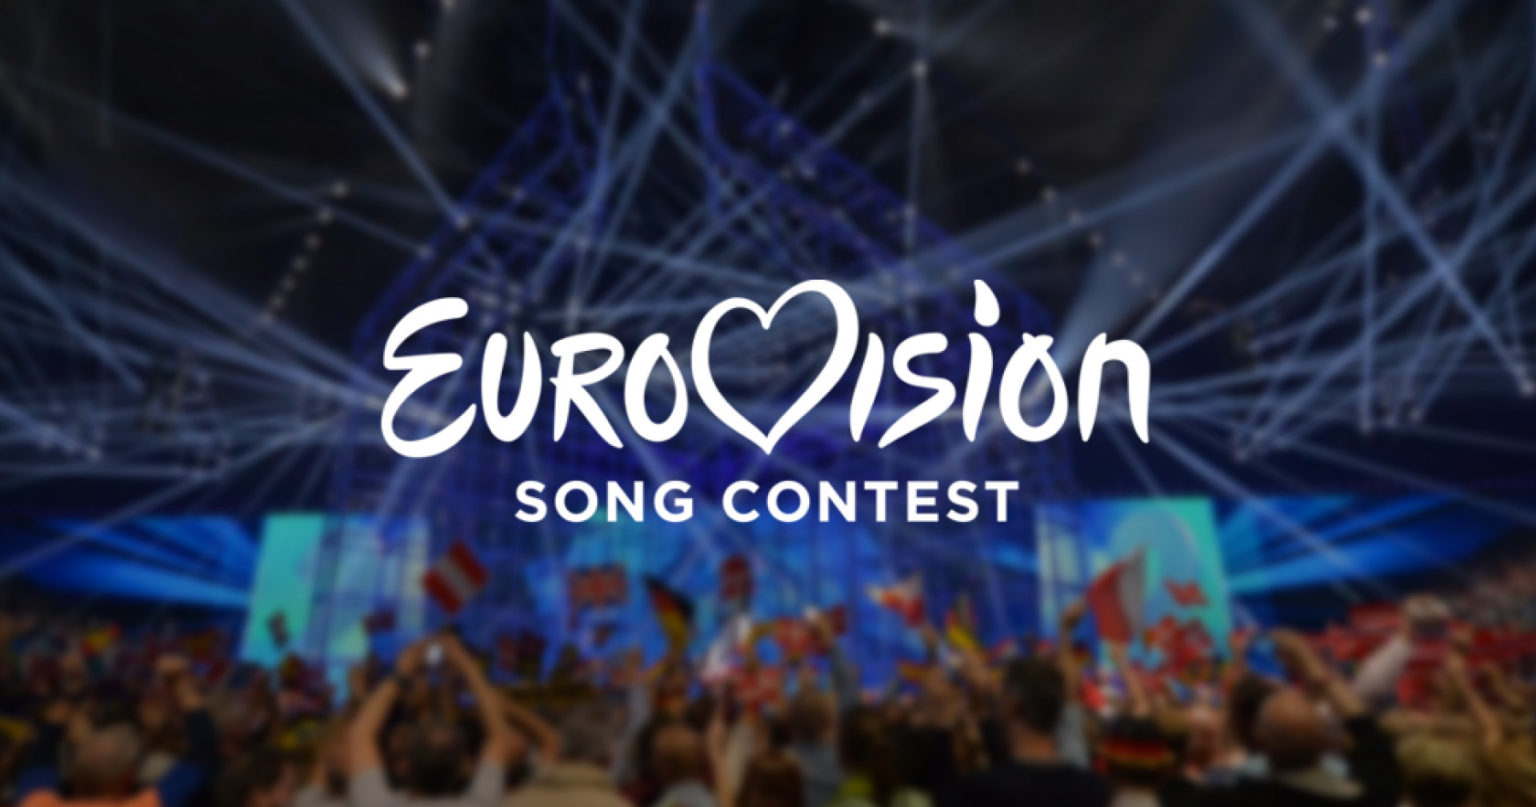 Here are the cities shortlisted to host the Eurovision Song Contest